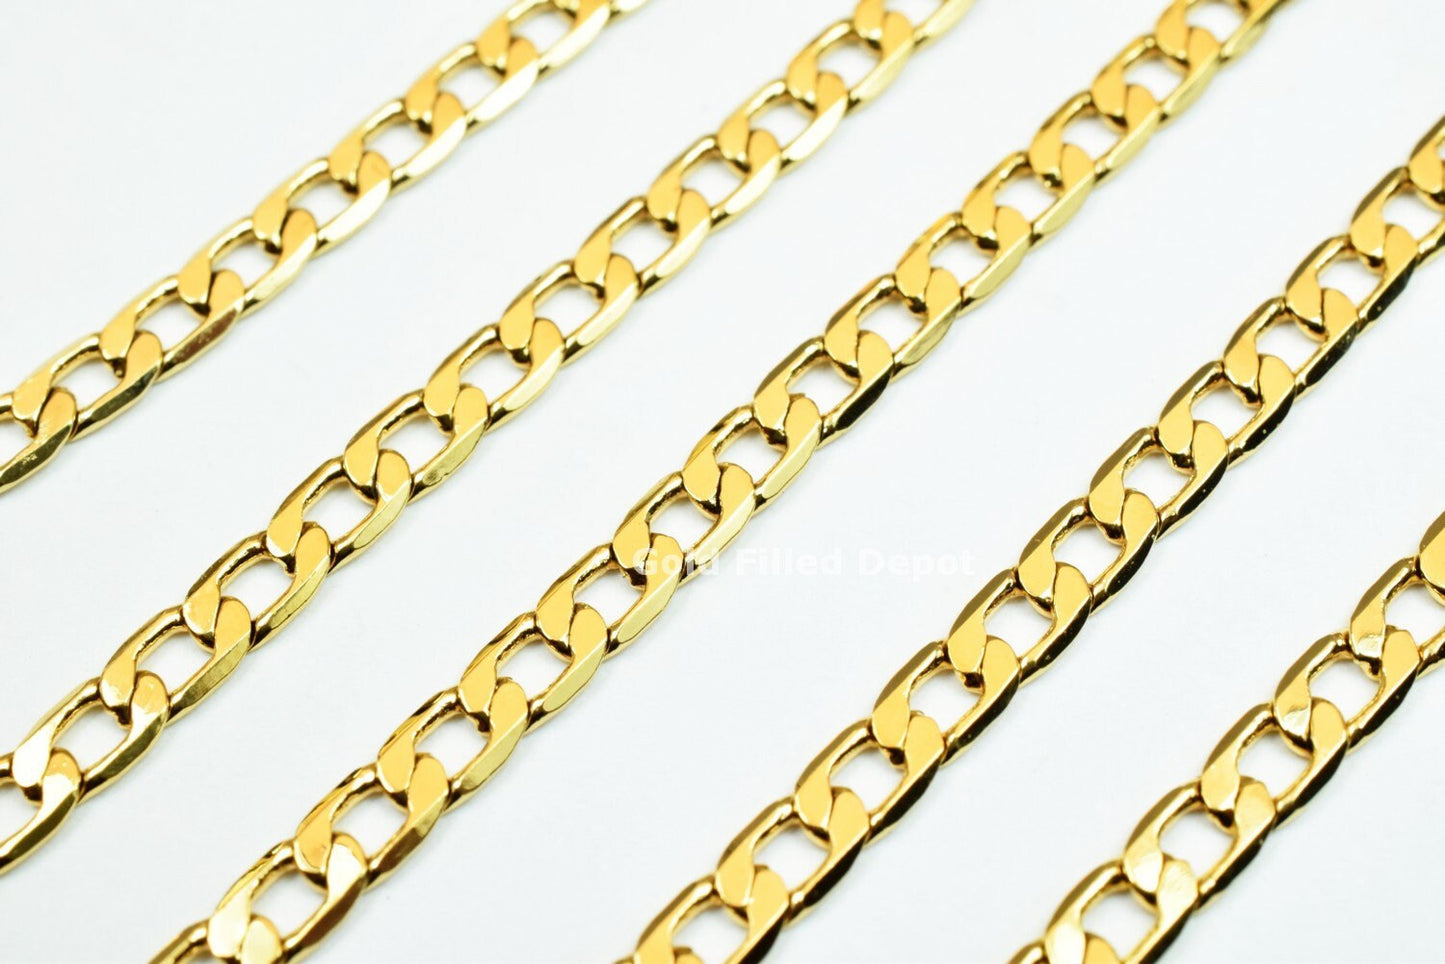 3 Feet 18K Gold Filled Chain Cuban Link Chain, Cable Chain Width 3mm Thickness 0.5mm Gold Filled Finding Chain For Jewelry Making GFC044